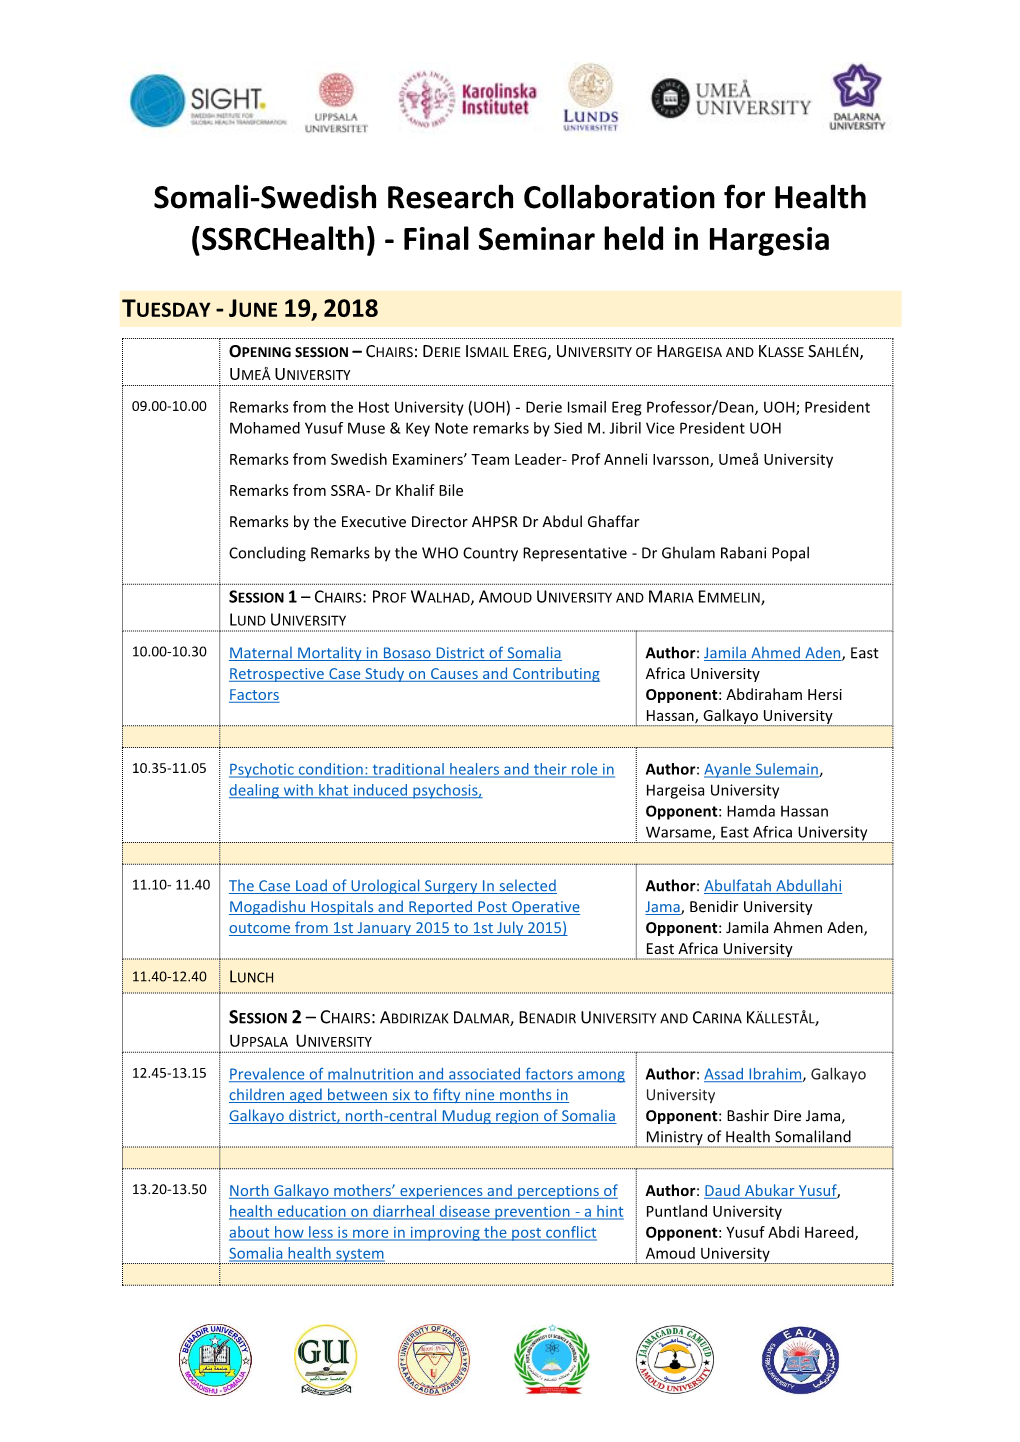 Somali-Swedish Research Collaboration for Health (Ssrchealth) - Final Seminar Held in Hargesia